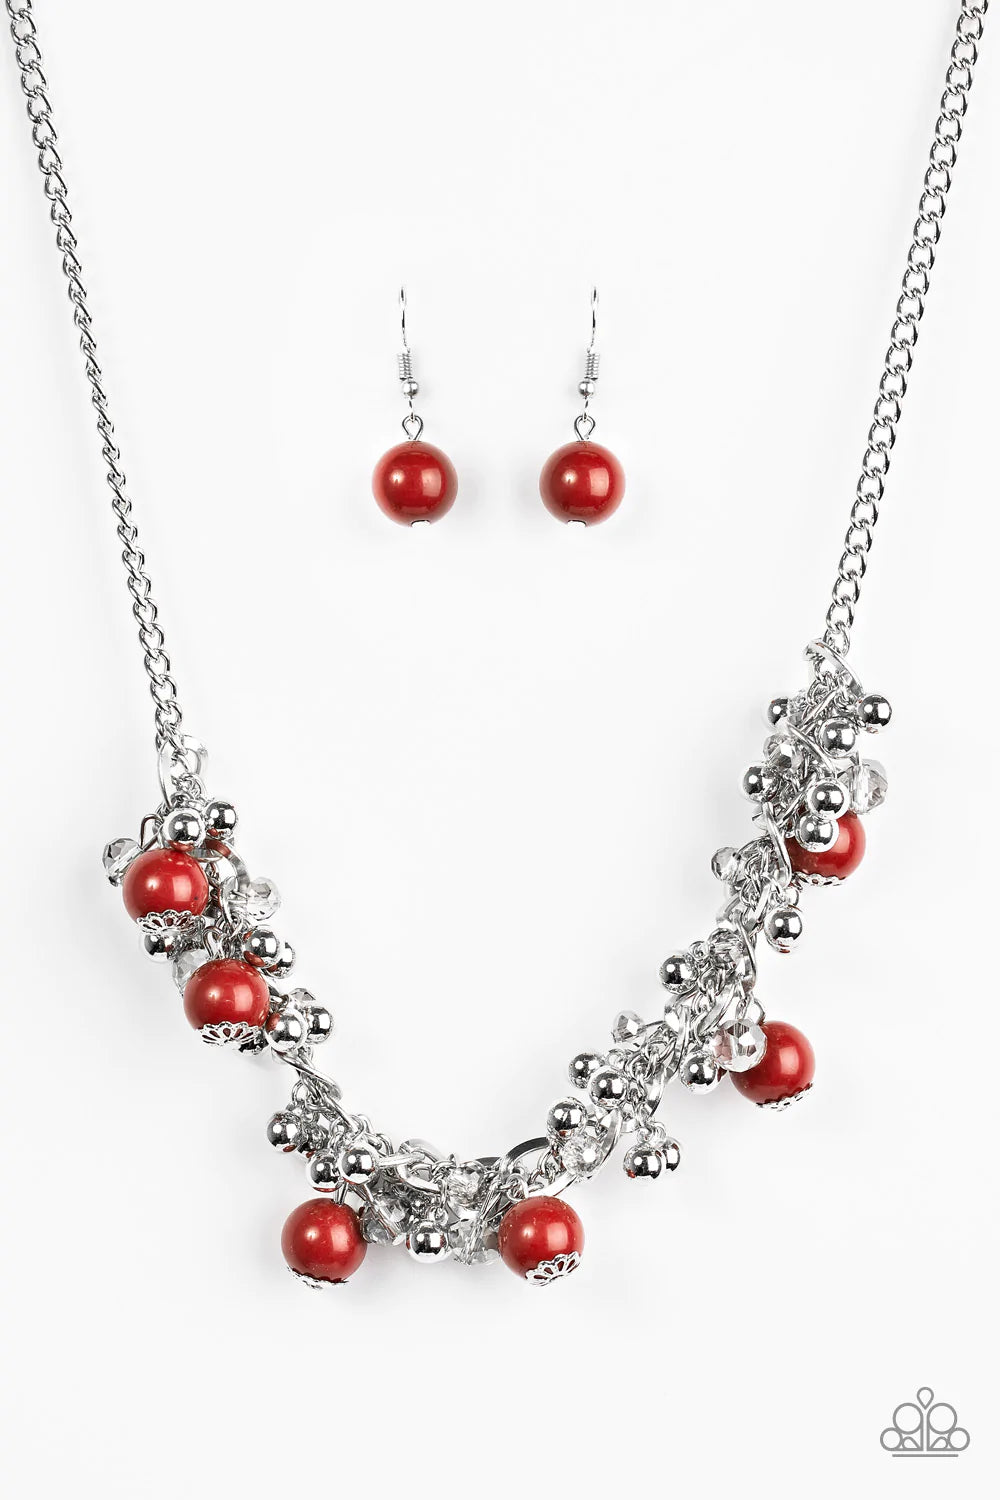 Paparazzi Necklace ~ A Pop Of Posh - Red